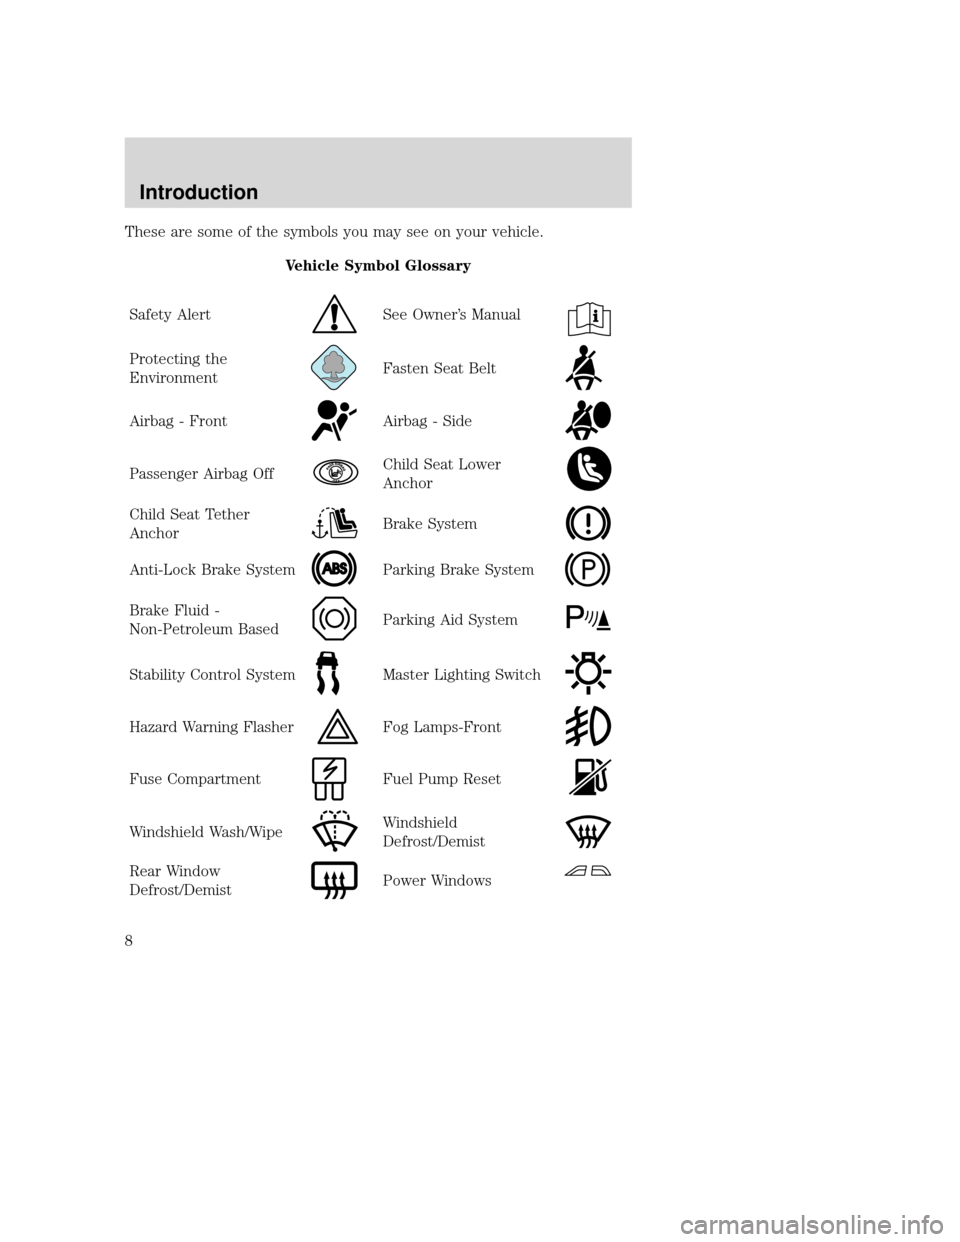 MAZDA MODEL TRIBUTE 2009  Owners Manual (in English) These are some of the symbols you may see on your vehicle.Vehicle Symbol Glossary
Safety Alert
See Owner’s Manual
Protecting the
EnvironmentFasten Seat Belt
Airbag - FrontAirbag - Side
Passenger Air